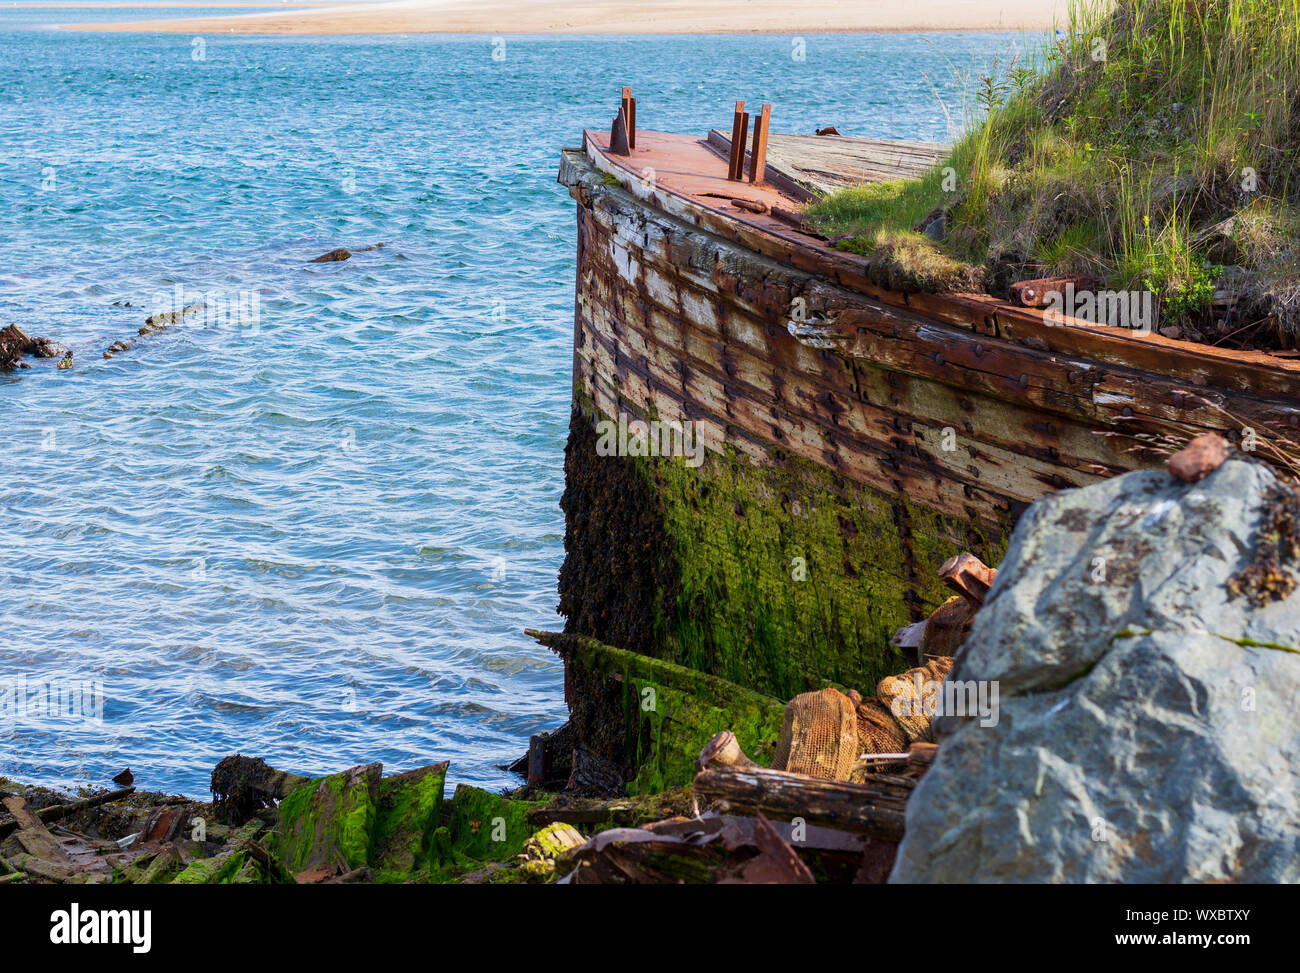 The prow of a big old ship, overgrown with moss and bushes. Nature takes its toll, destroying what man has created. Nature absorbs the old wooden ship Stock Photo